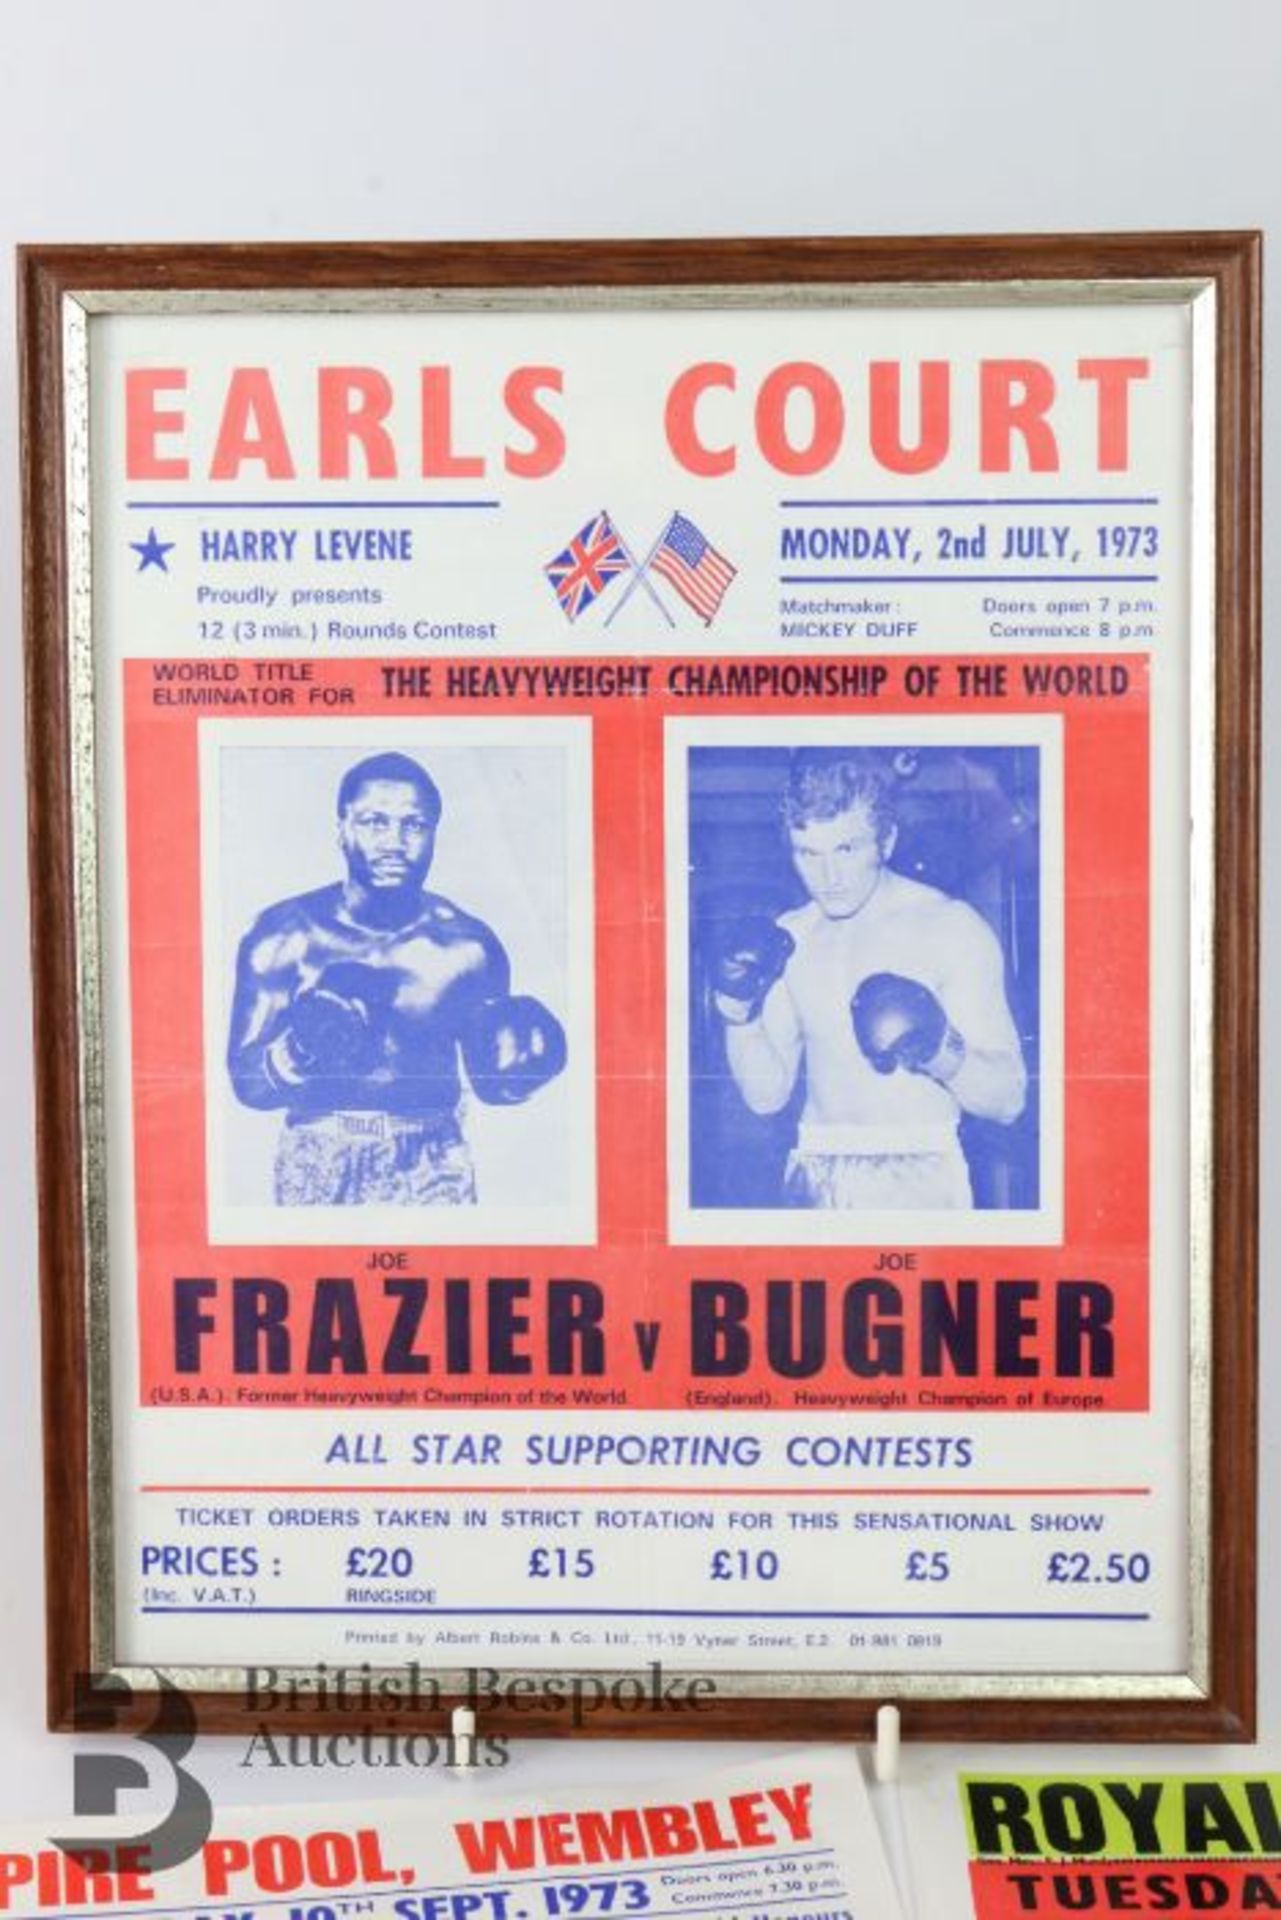 Pugilista Interest - Match Flyers and Posters - Image 2 of 9